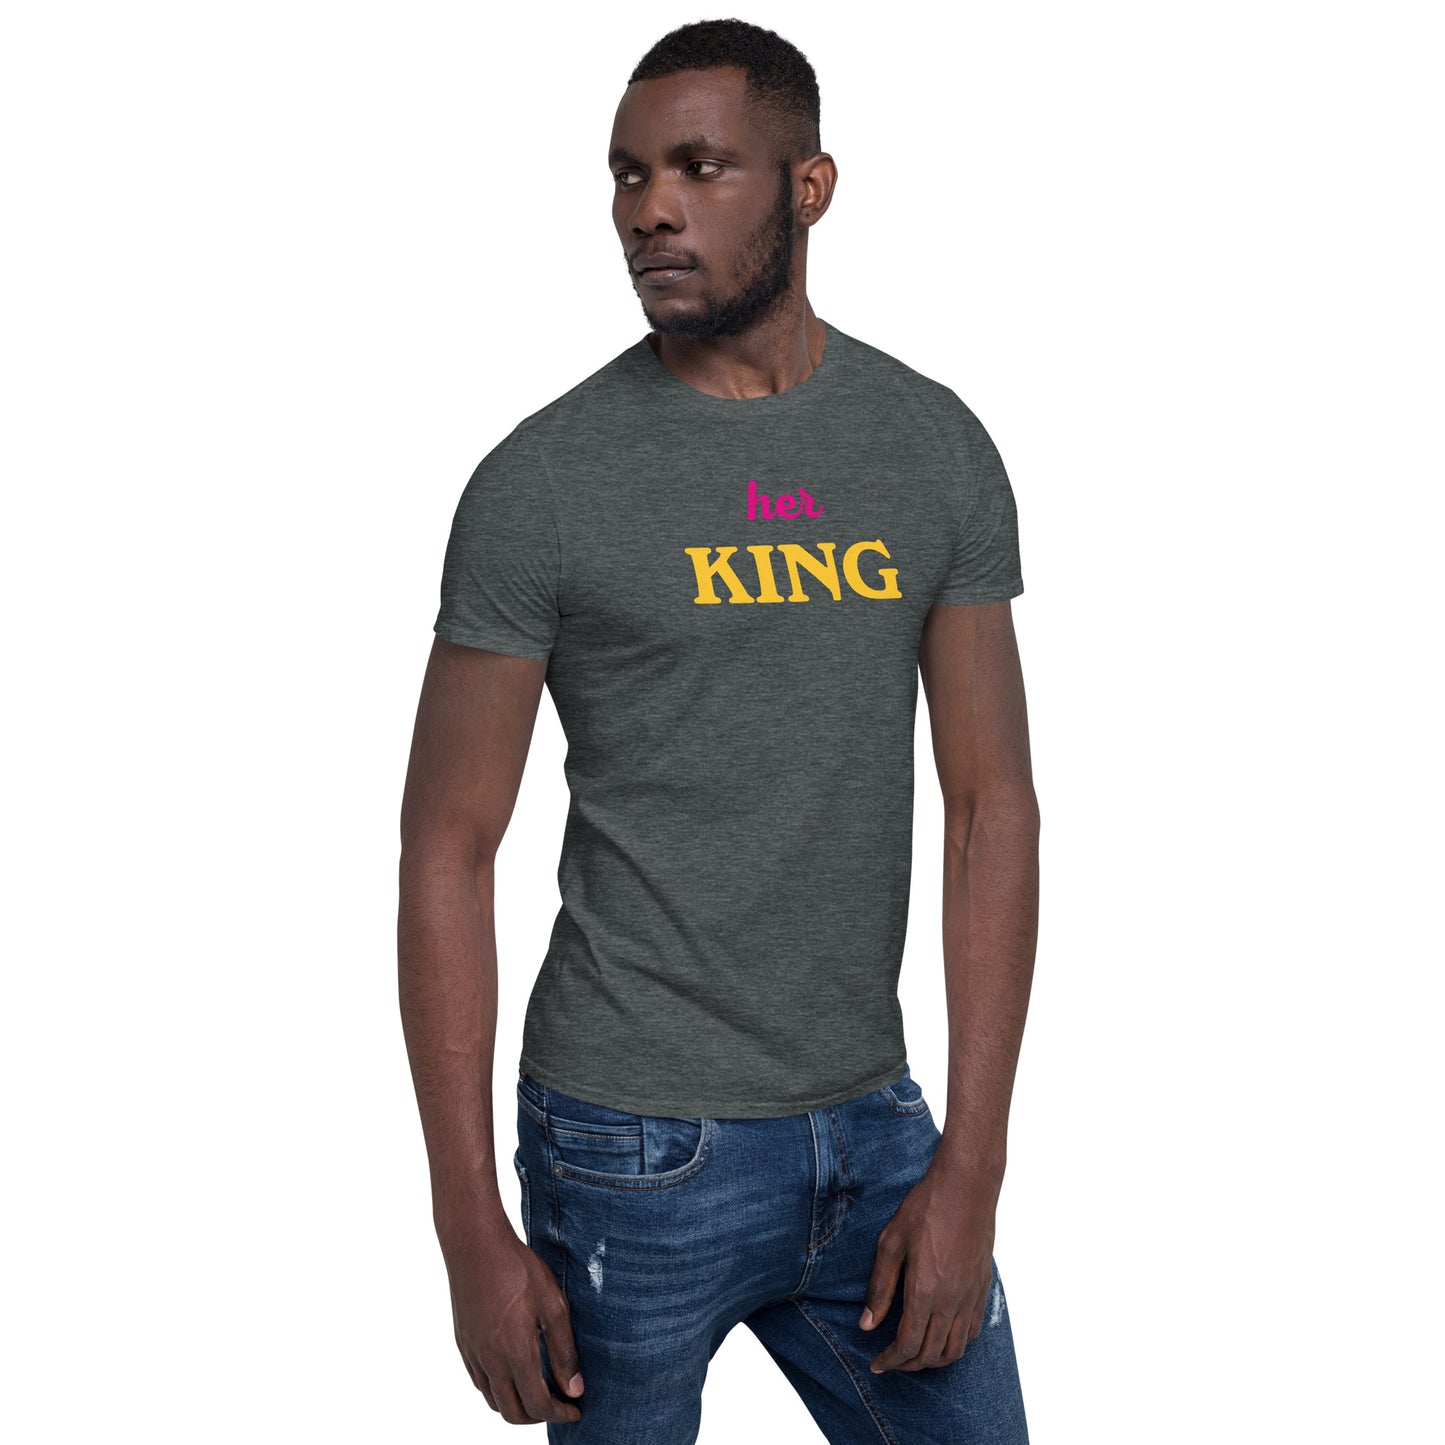 Her King Softstyle T-Shirt heather left